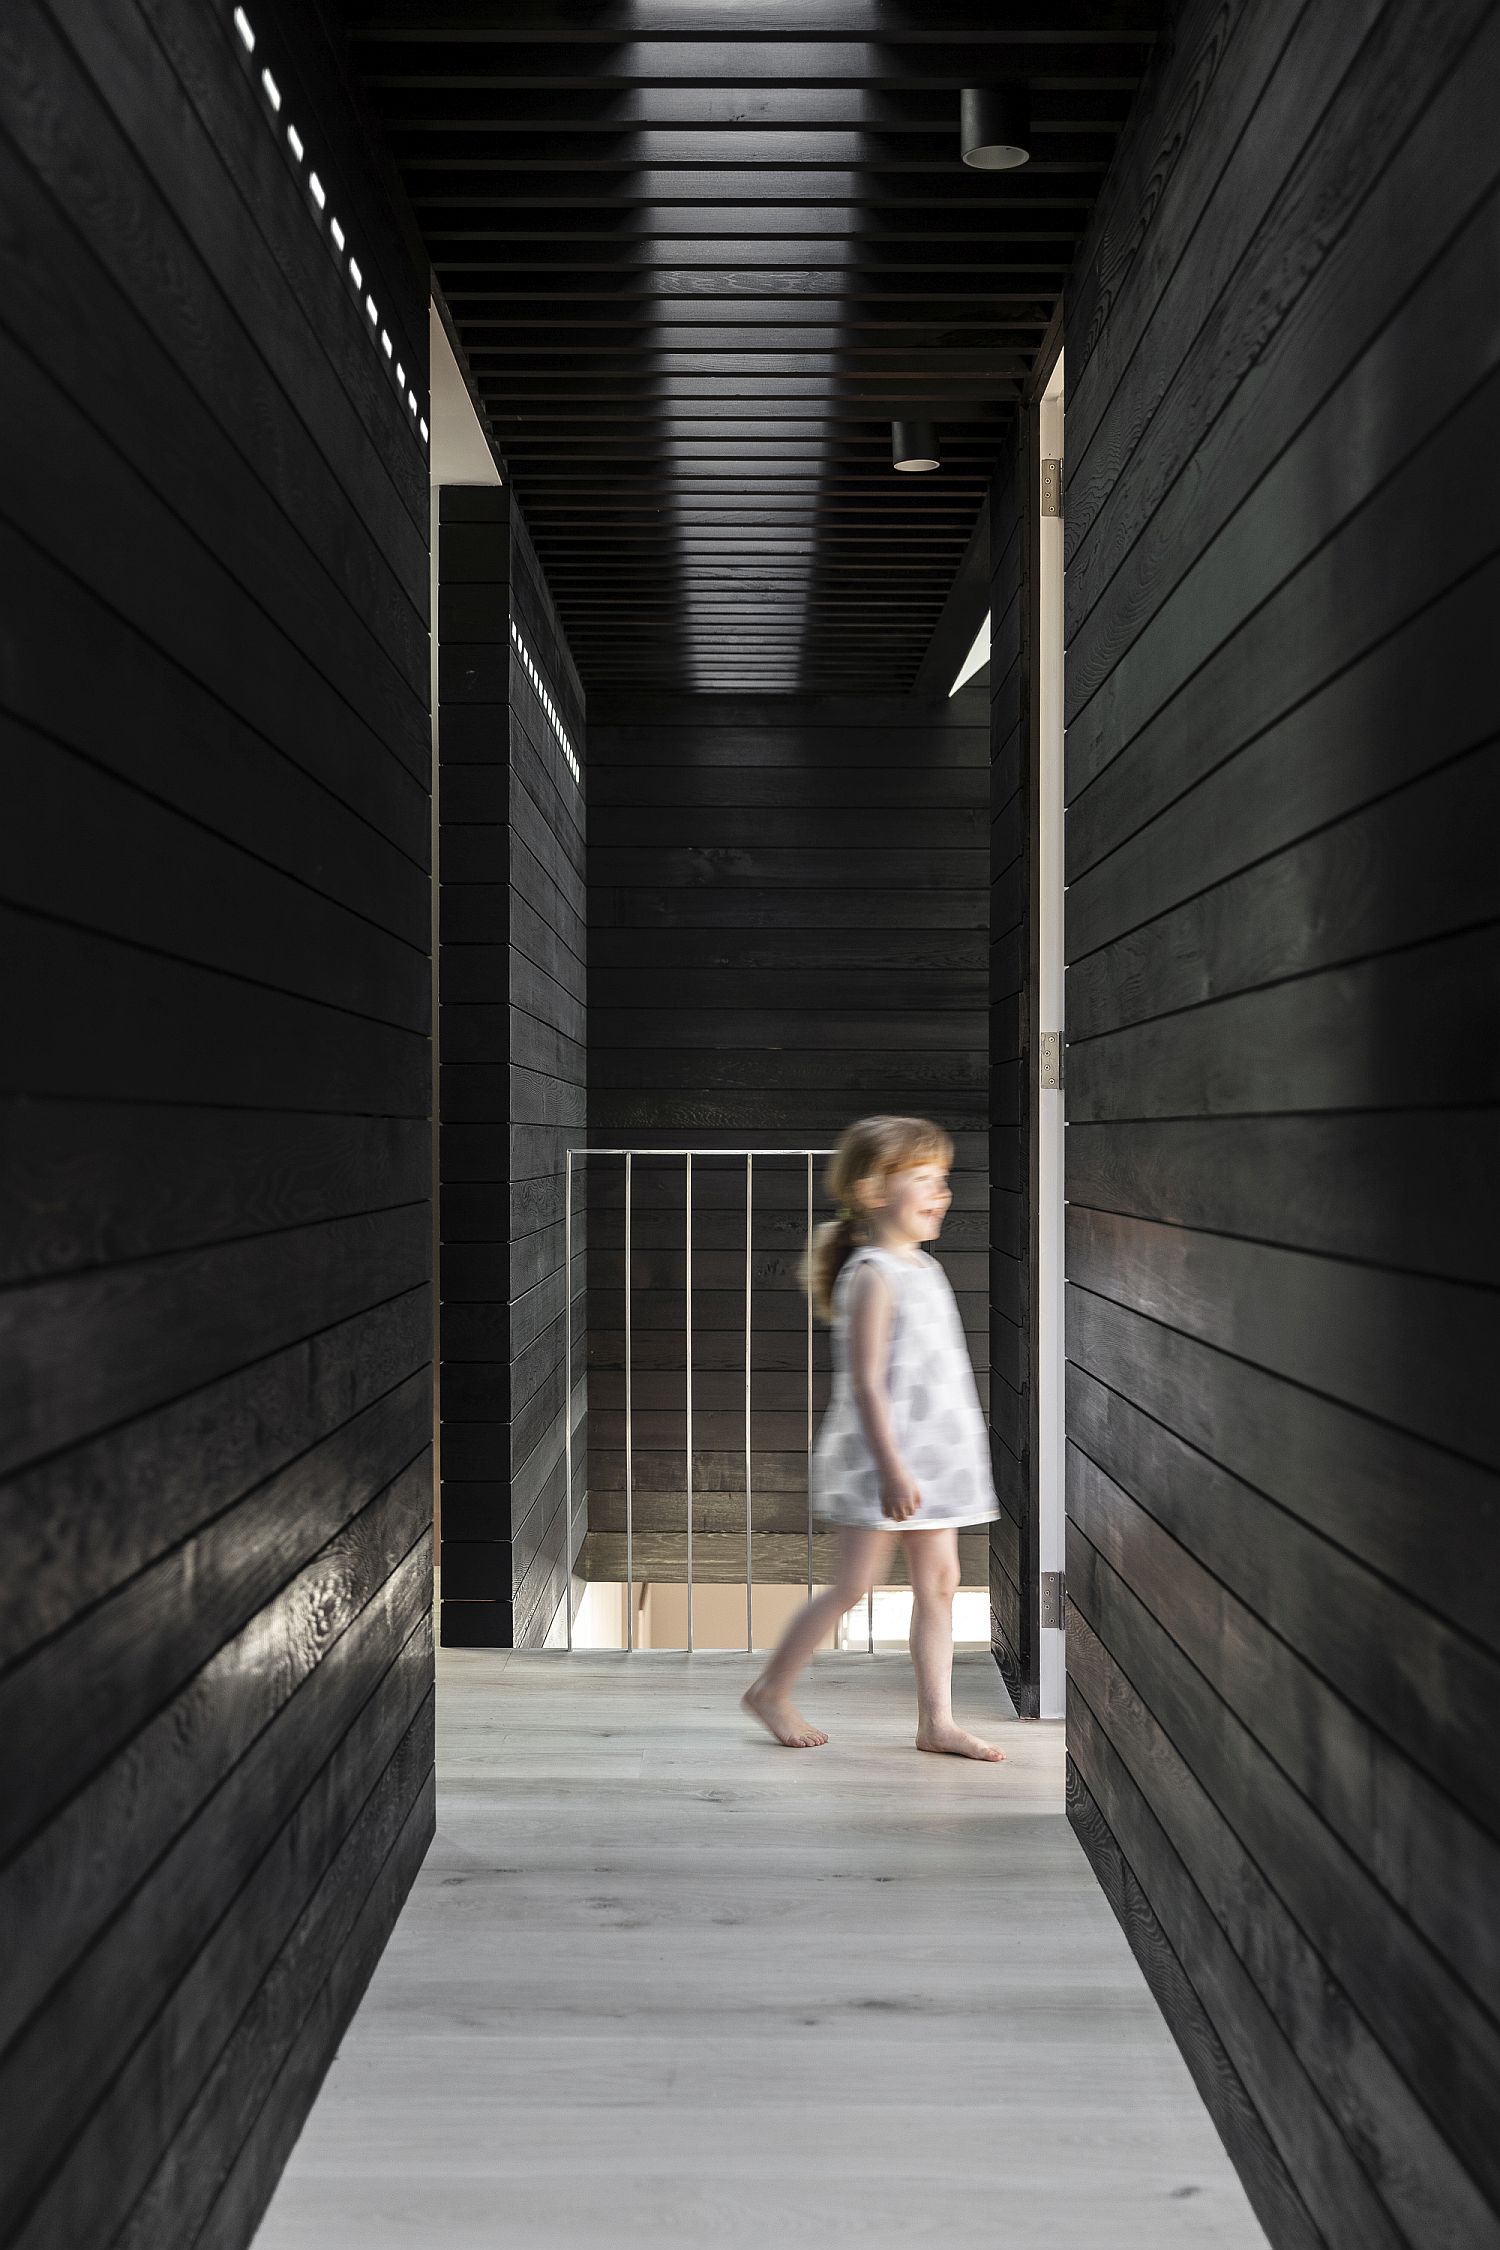 New-central-shaft-brings-light-into-the-aging-house